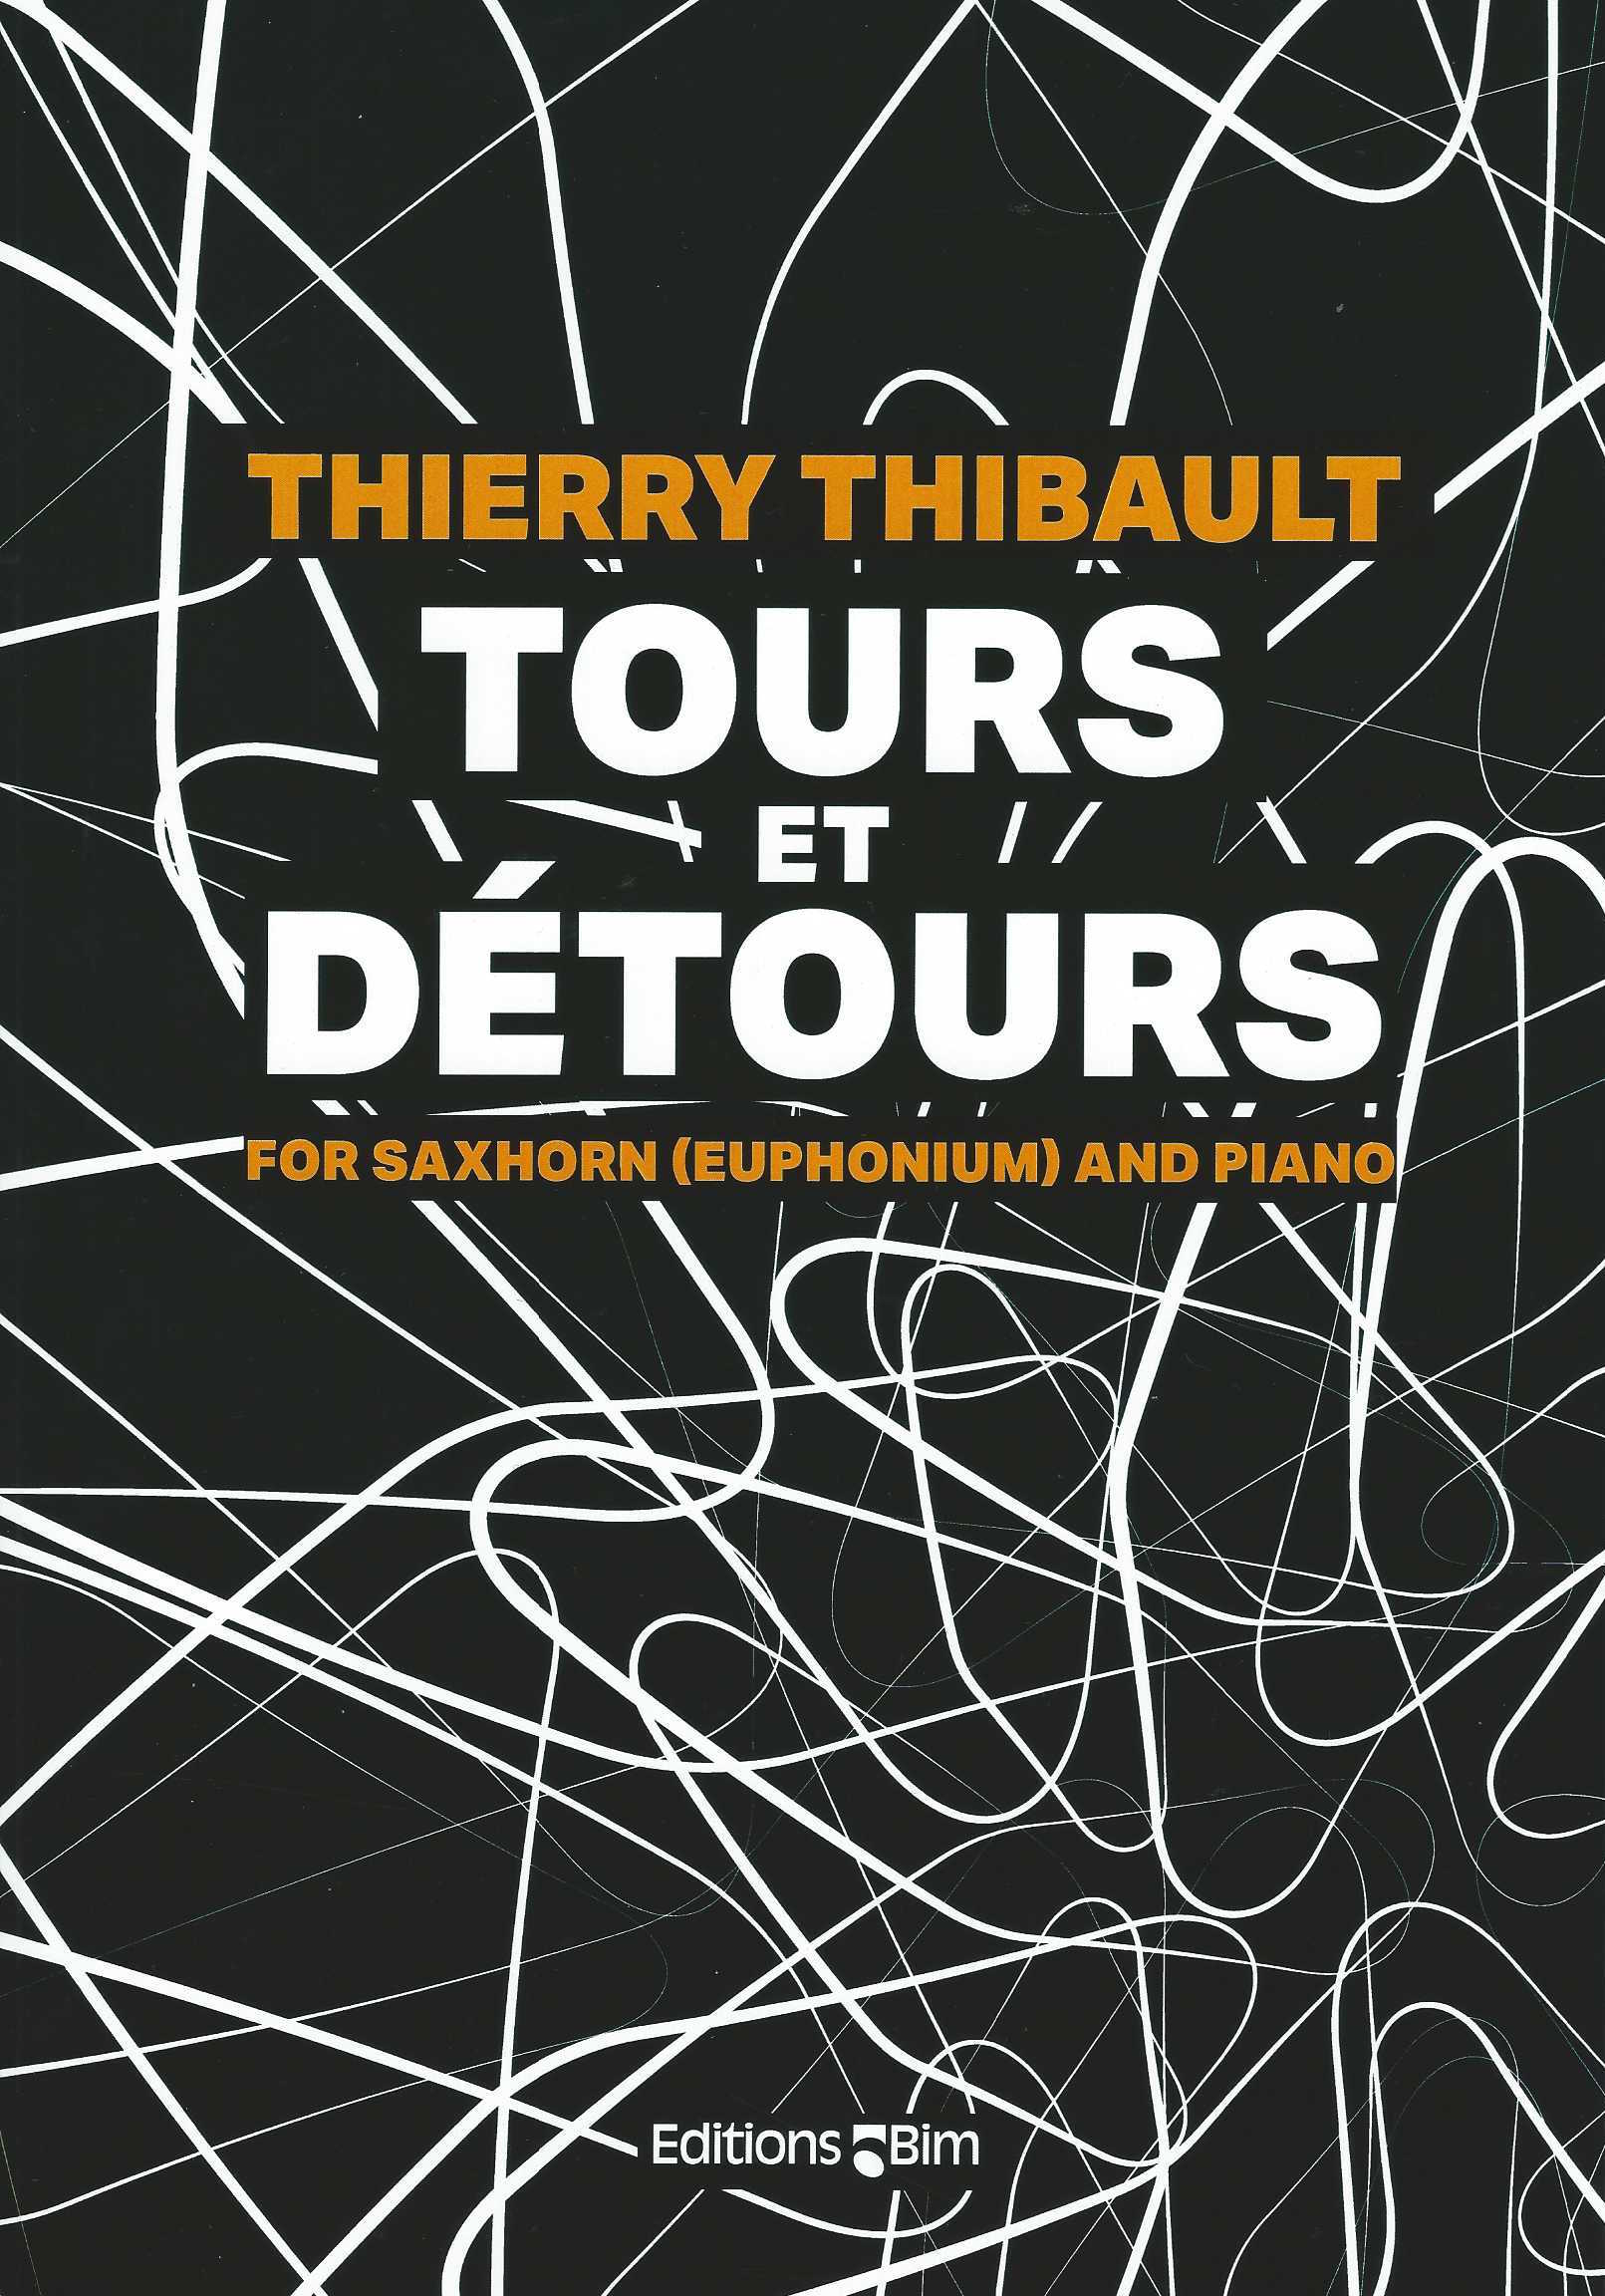 Tours et Detours - for Saxhorn or Euphonium and Piano - Thierry Thibault